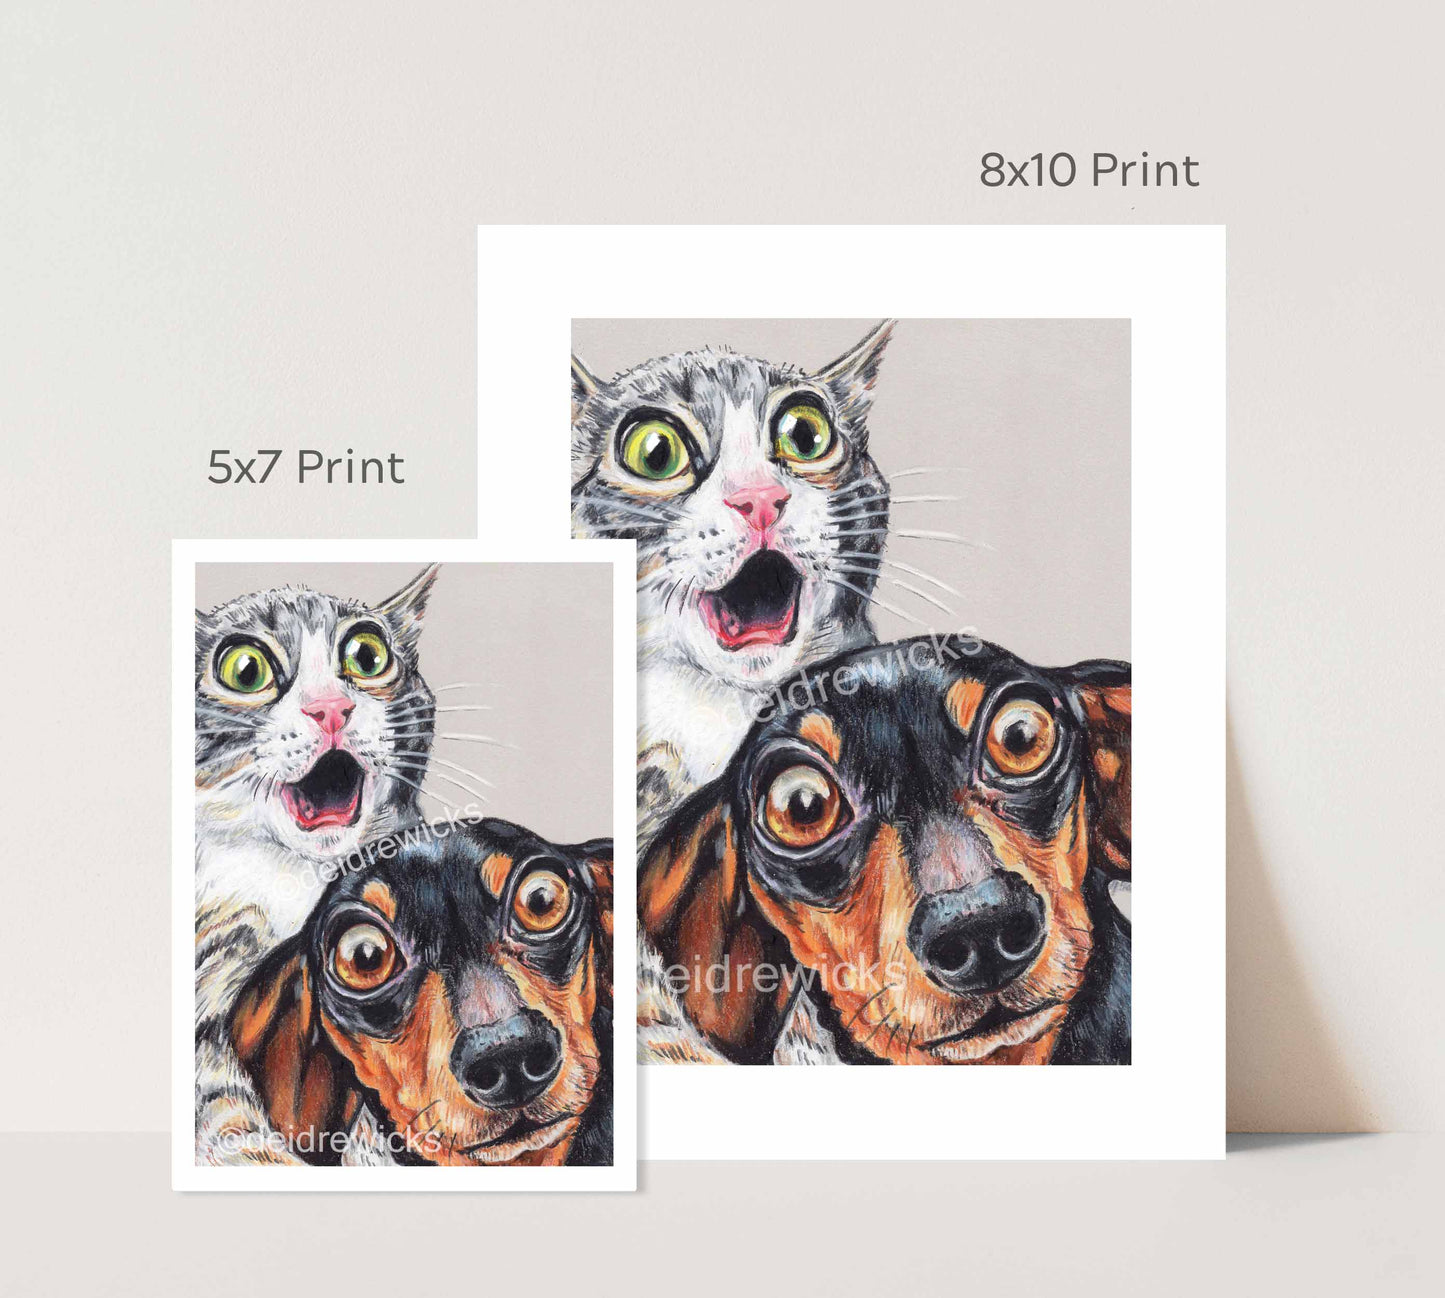 Size difference between prints of a tabby cat and dachshund dog by Deidre Wicks